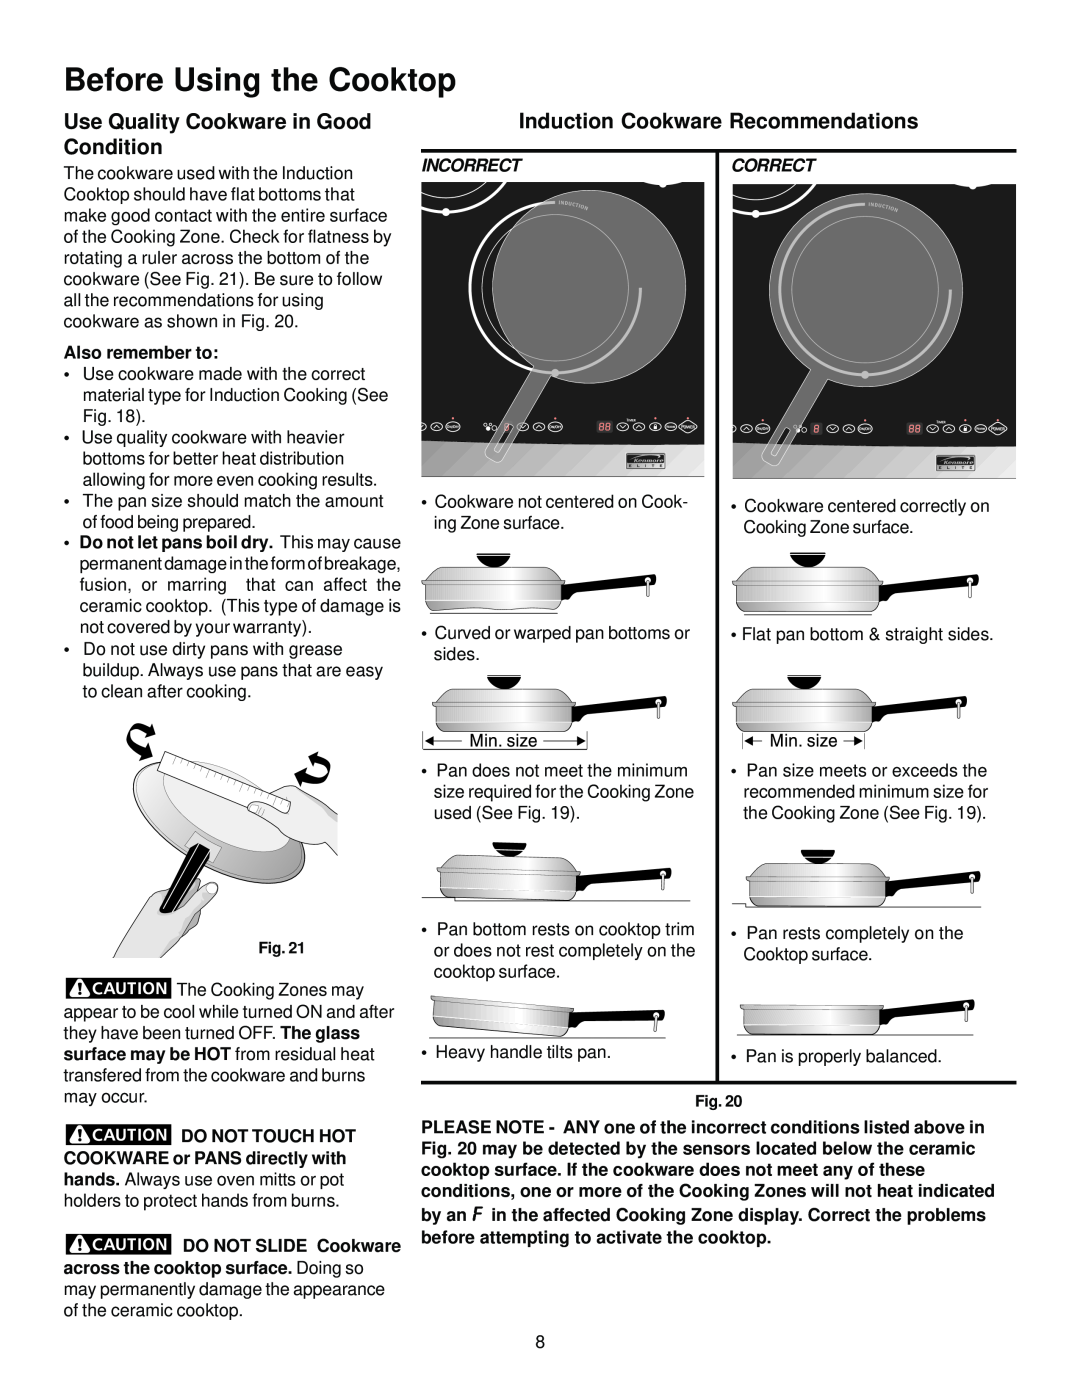 Sears 790.428 manual Before Using the Cooktop, Use Quality Cookware in Good, Induction Cookware Recommendations, Condition 